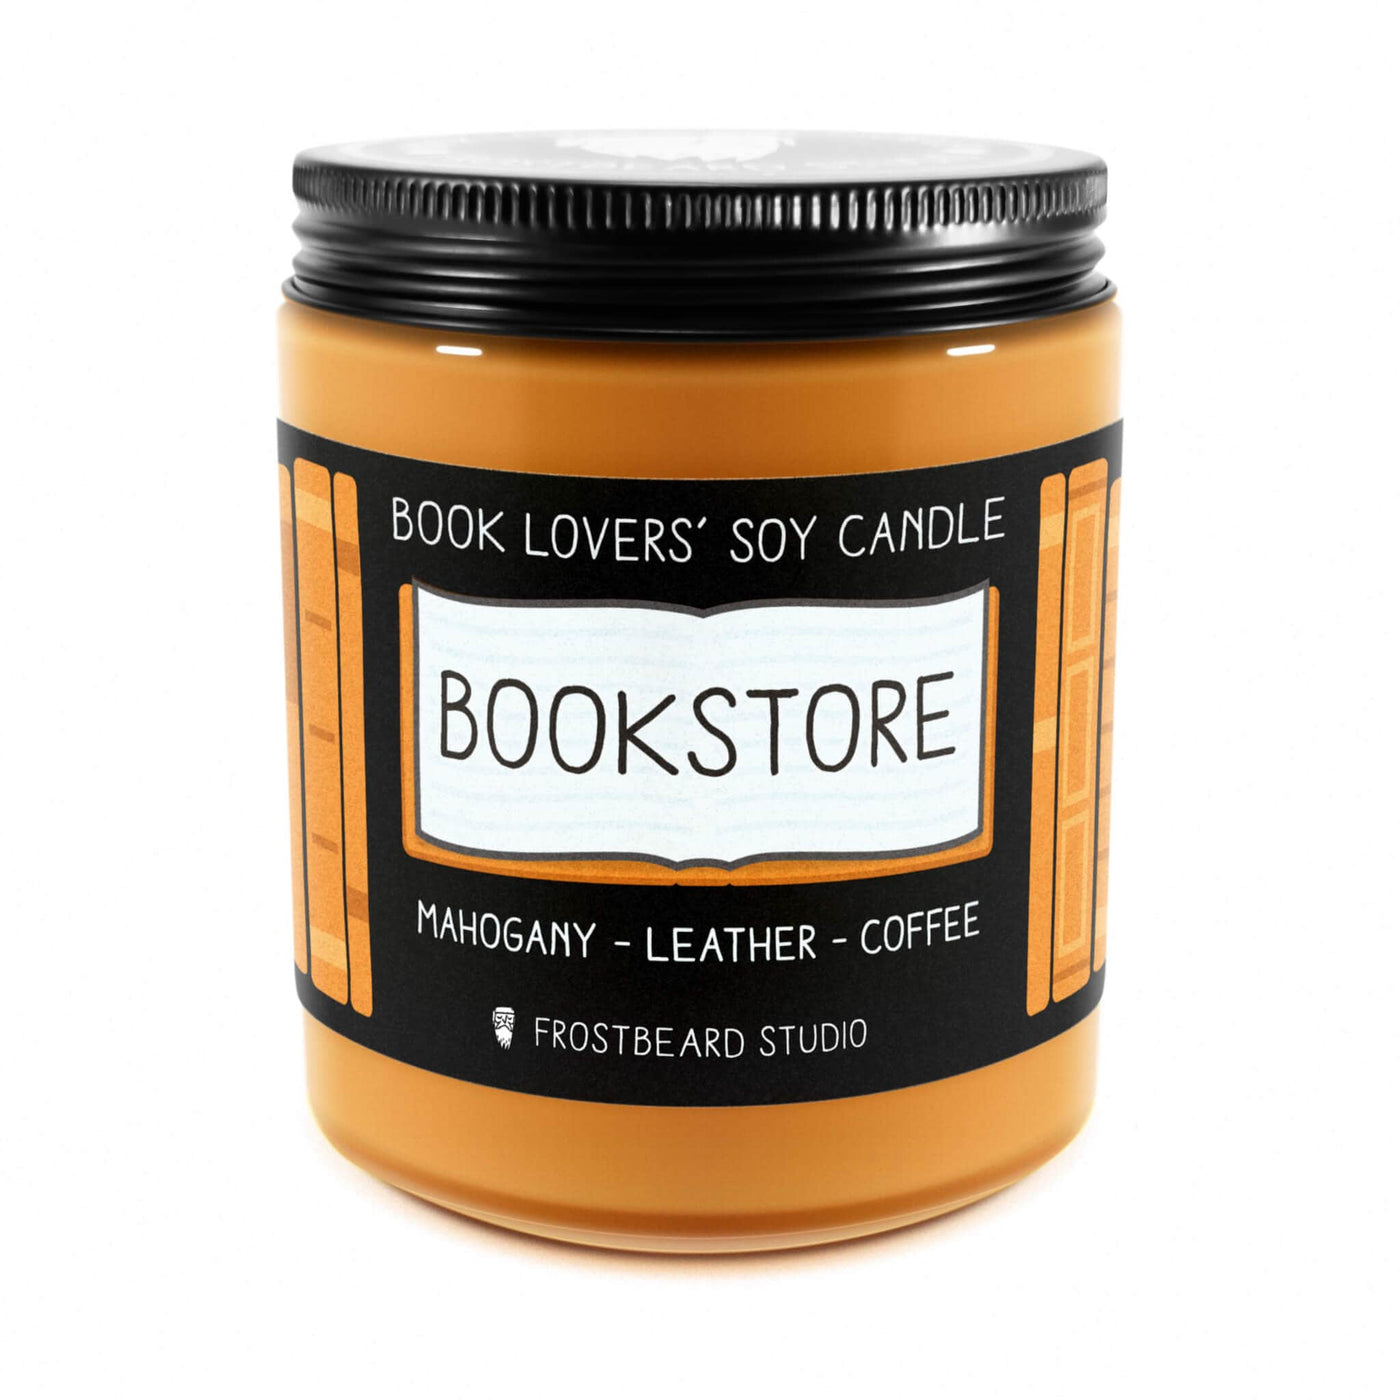 Bookstore - 8 oz Jar - Book Lovers' Soy Candle - Frostbeard Studio